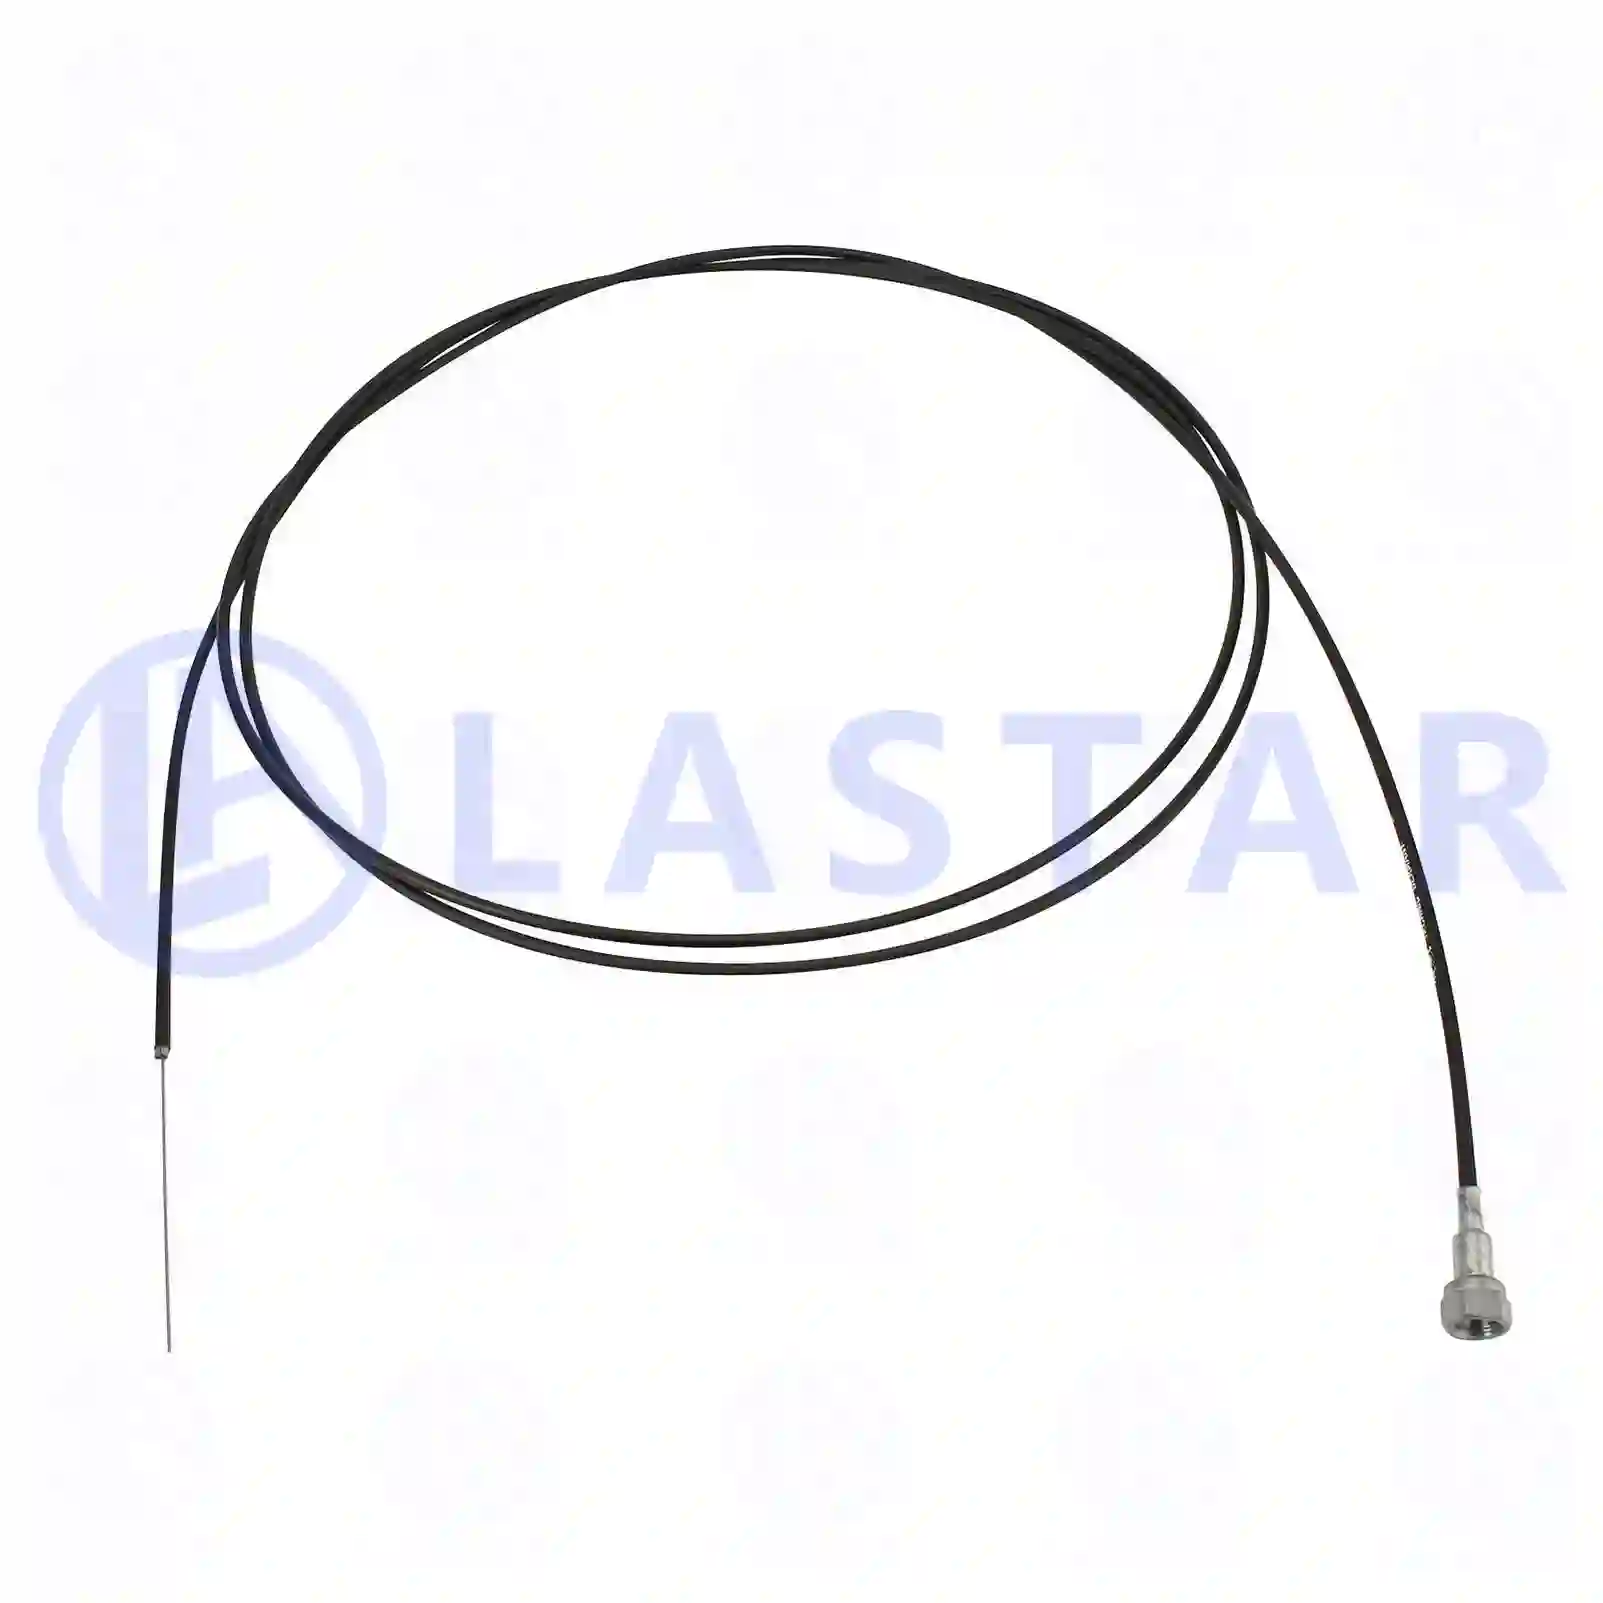 Throttle cable, 77700786, 1343155, 1343156, 361185, 365161, ZG02196-0008 ||  77700786 Lastar Spare Part | Truck Spare Parts, Auotomotive Spare Parts Throttle cable, 77700786, 1343155, 1343156, 361185, 365161, ZG02196-0008 ||  77700786 Lastar Spare Part | Truck Spare Parts, Auotomotive Spare Parts